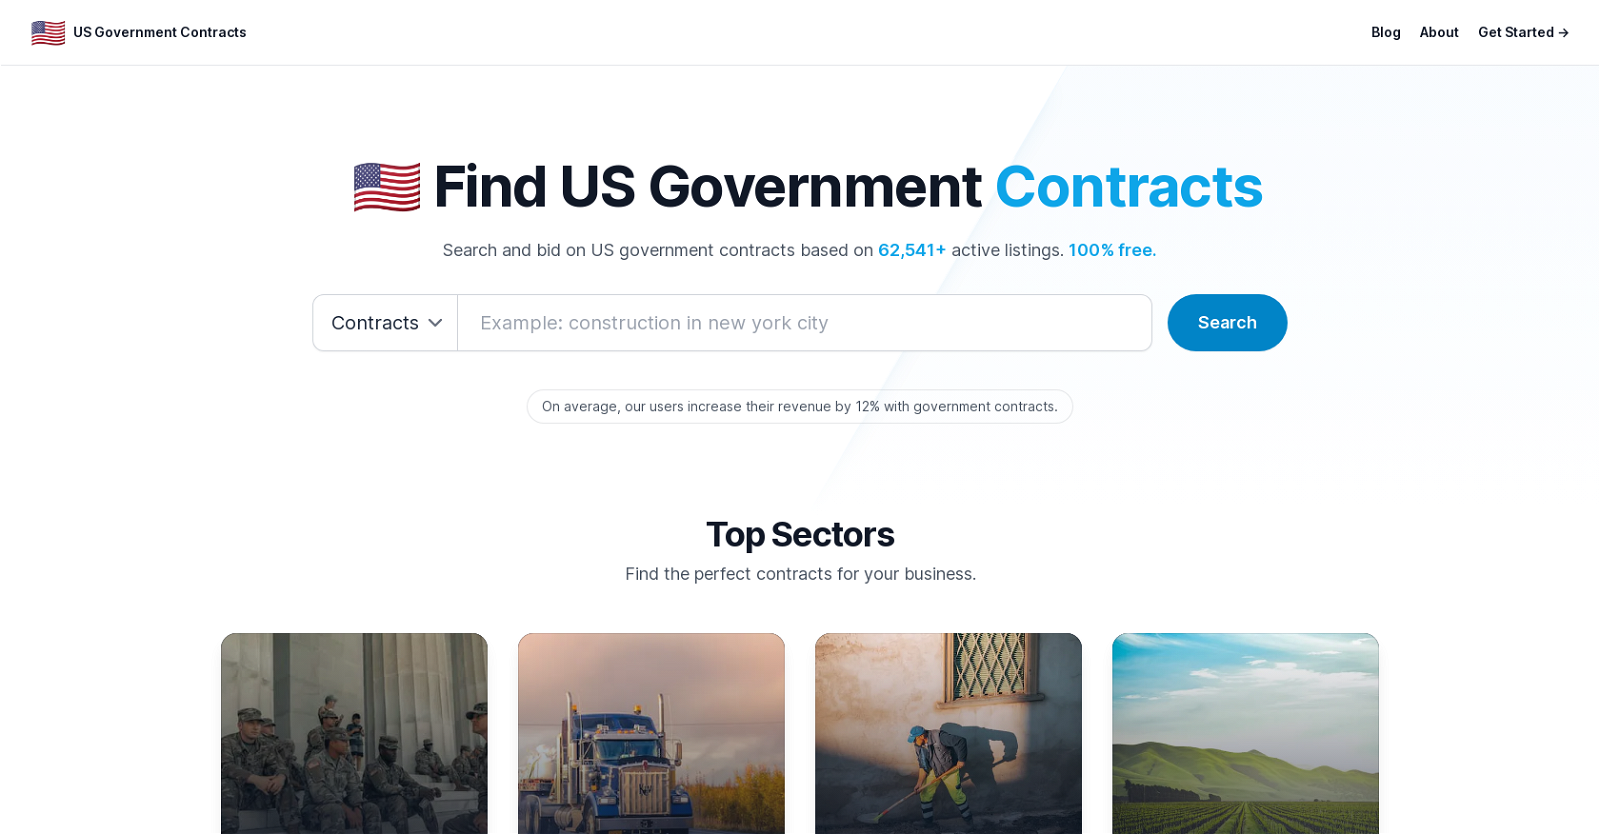 US Government Contracts website